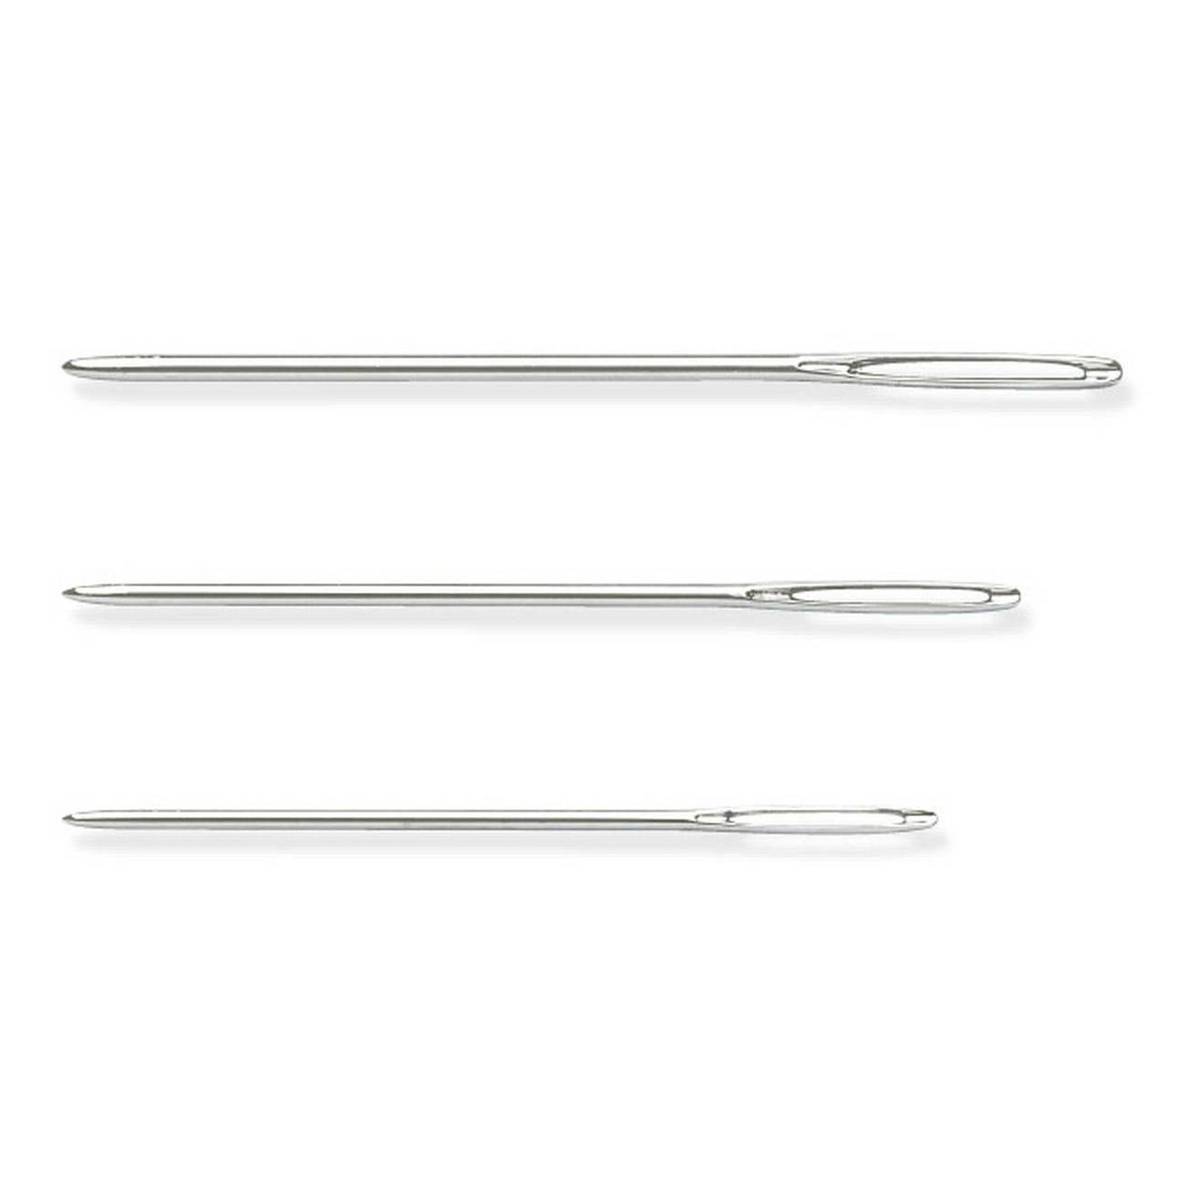 Milward Tapestry Needles No. 18-22 6 Pack